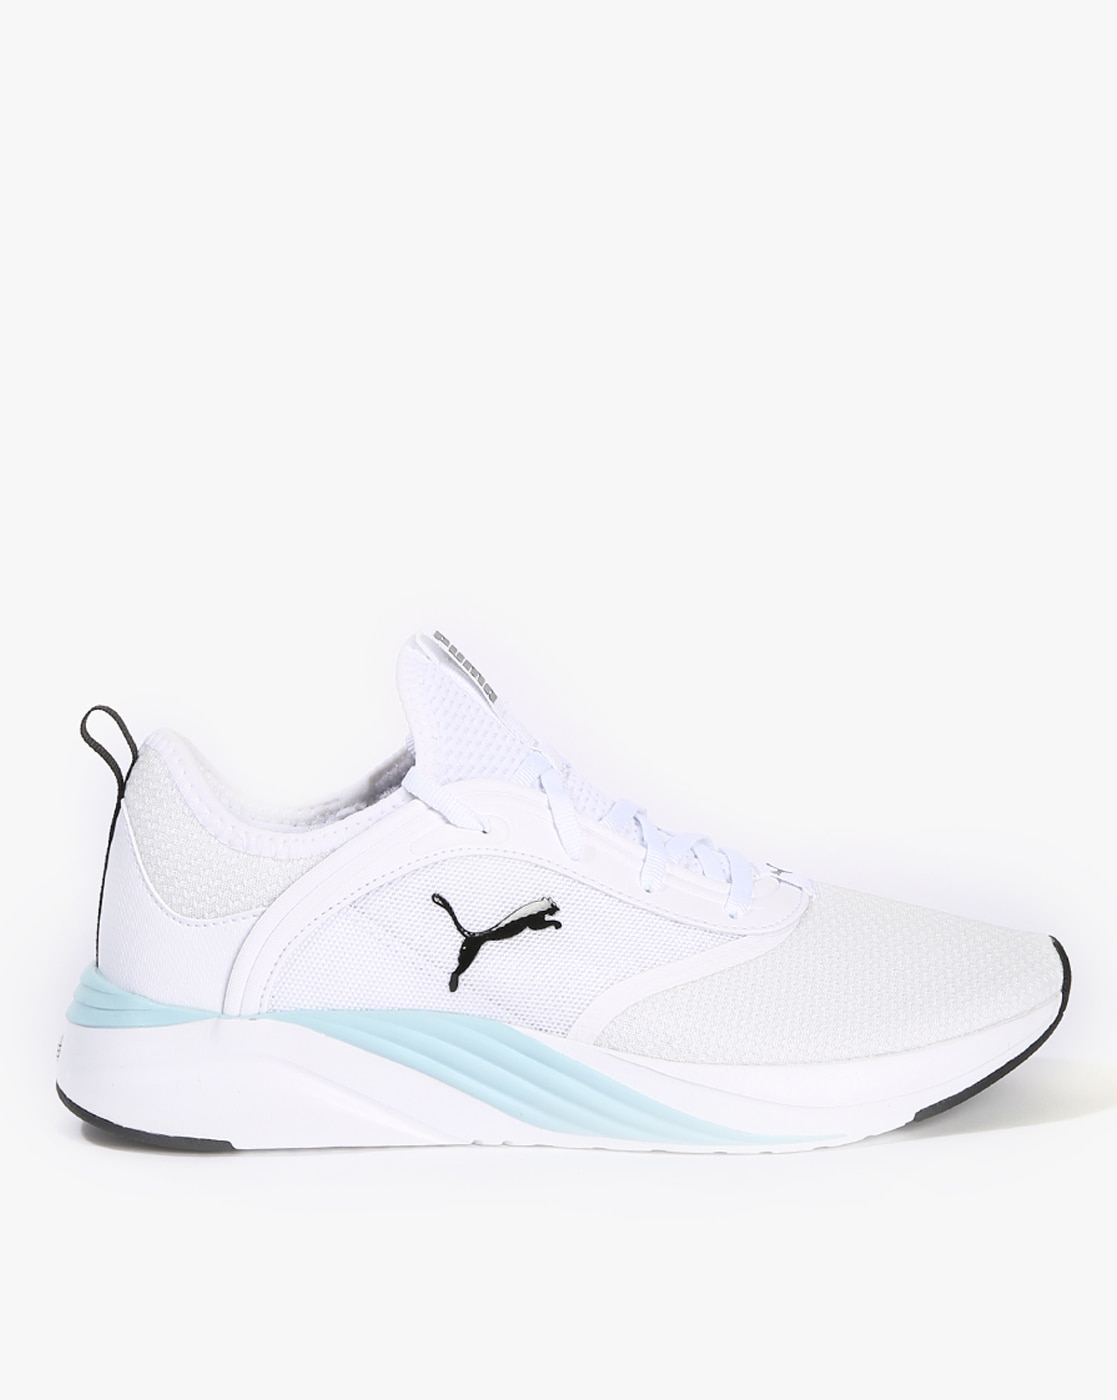 White Sports Shoes at Rs 280/pair in Uttarkashi | ID: 2850154931797